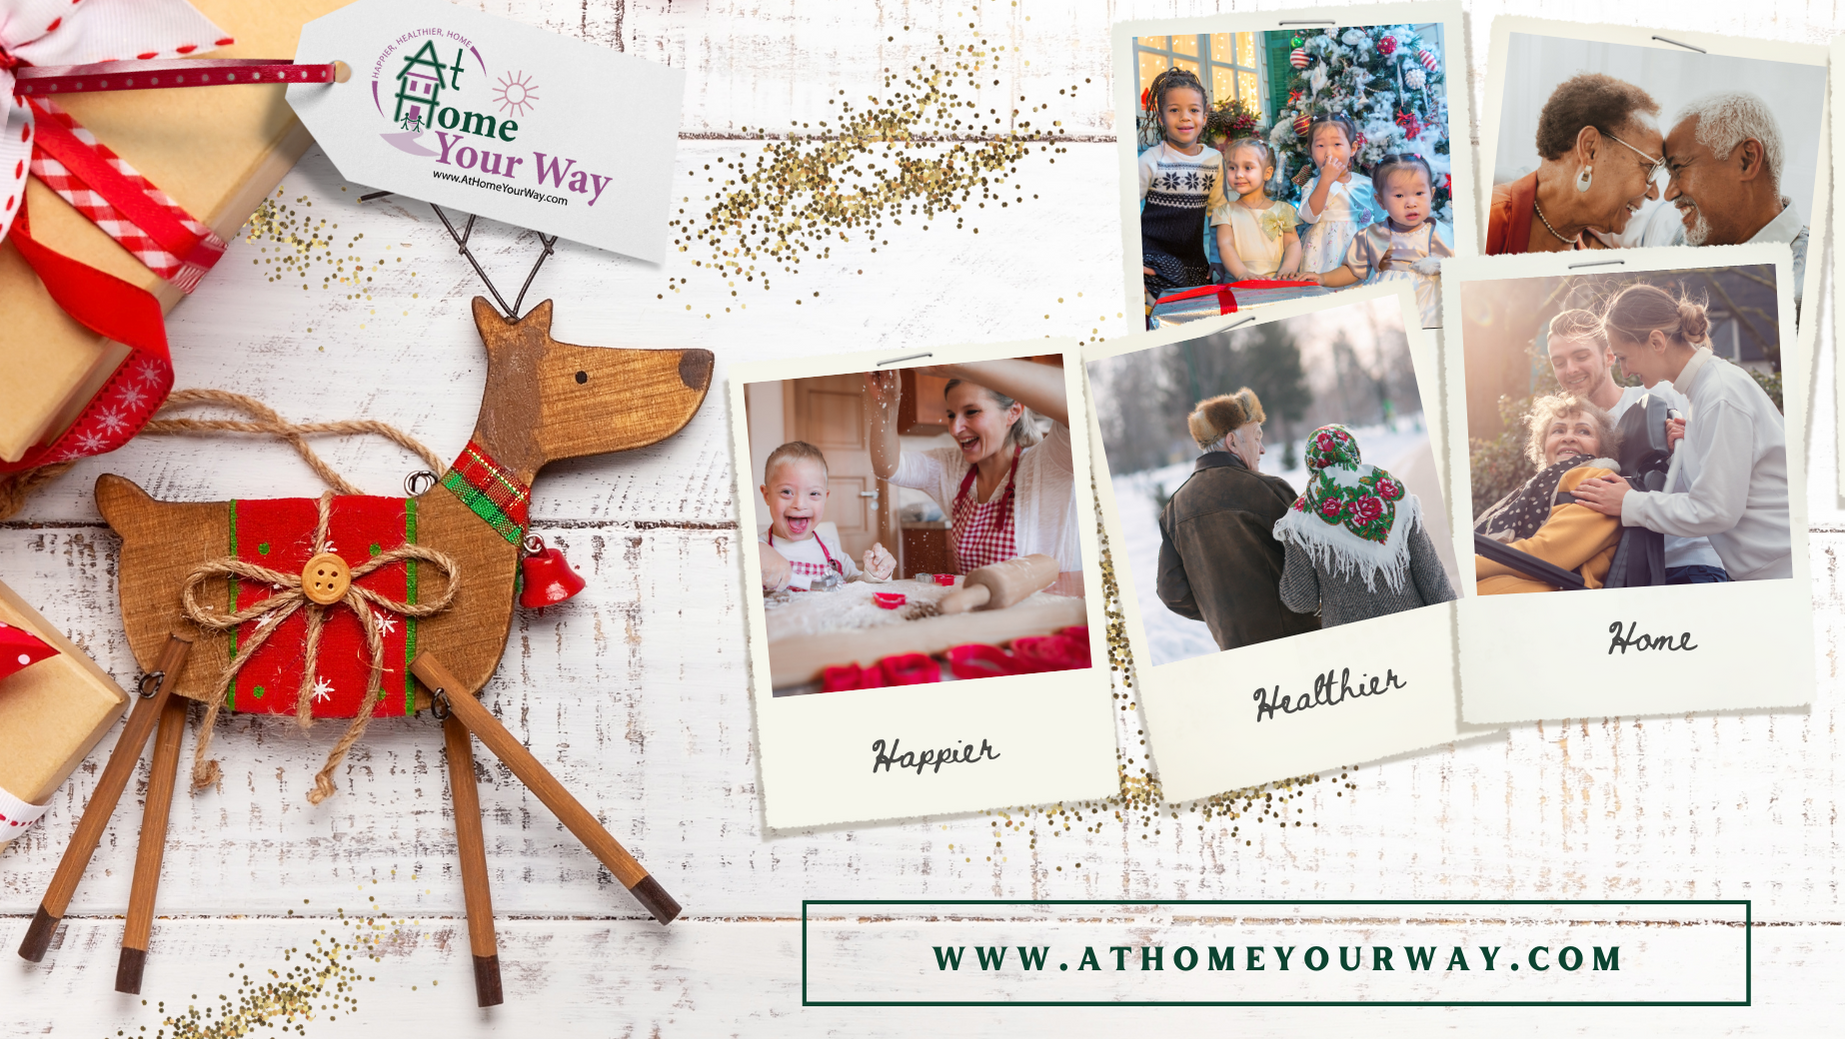 Holiday image with gift from At Home Your Way. Polaroid images of individuals with disabilities home spending time with family.